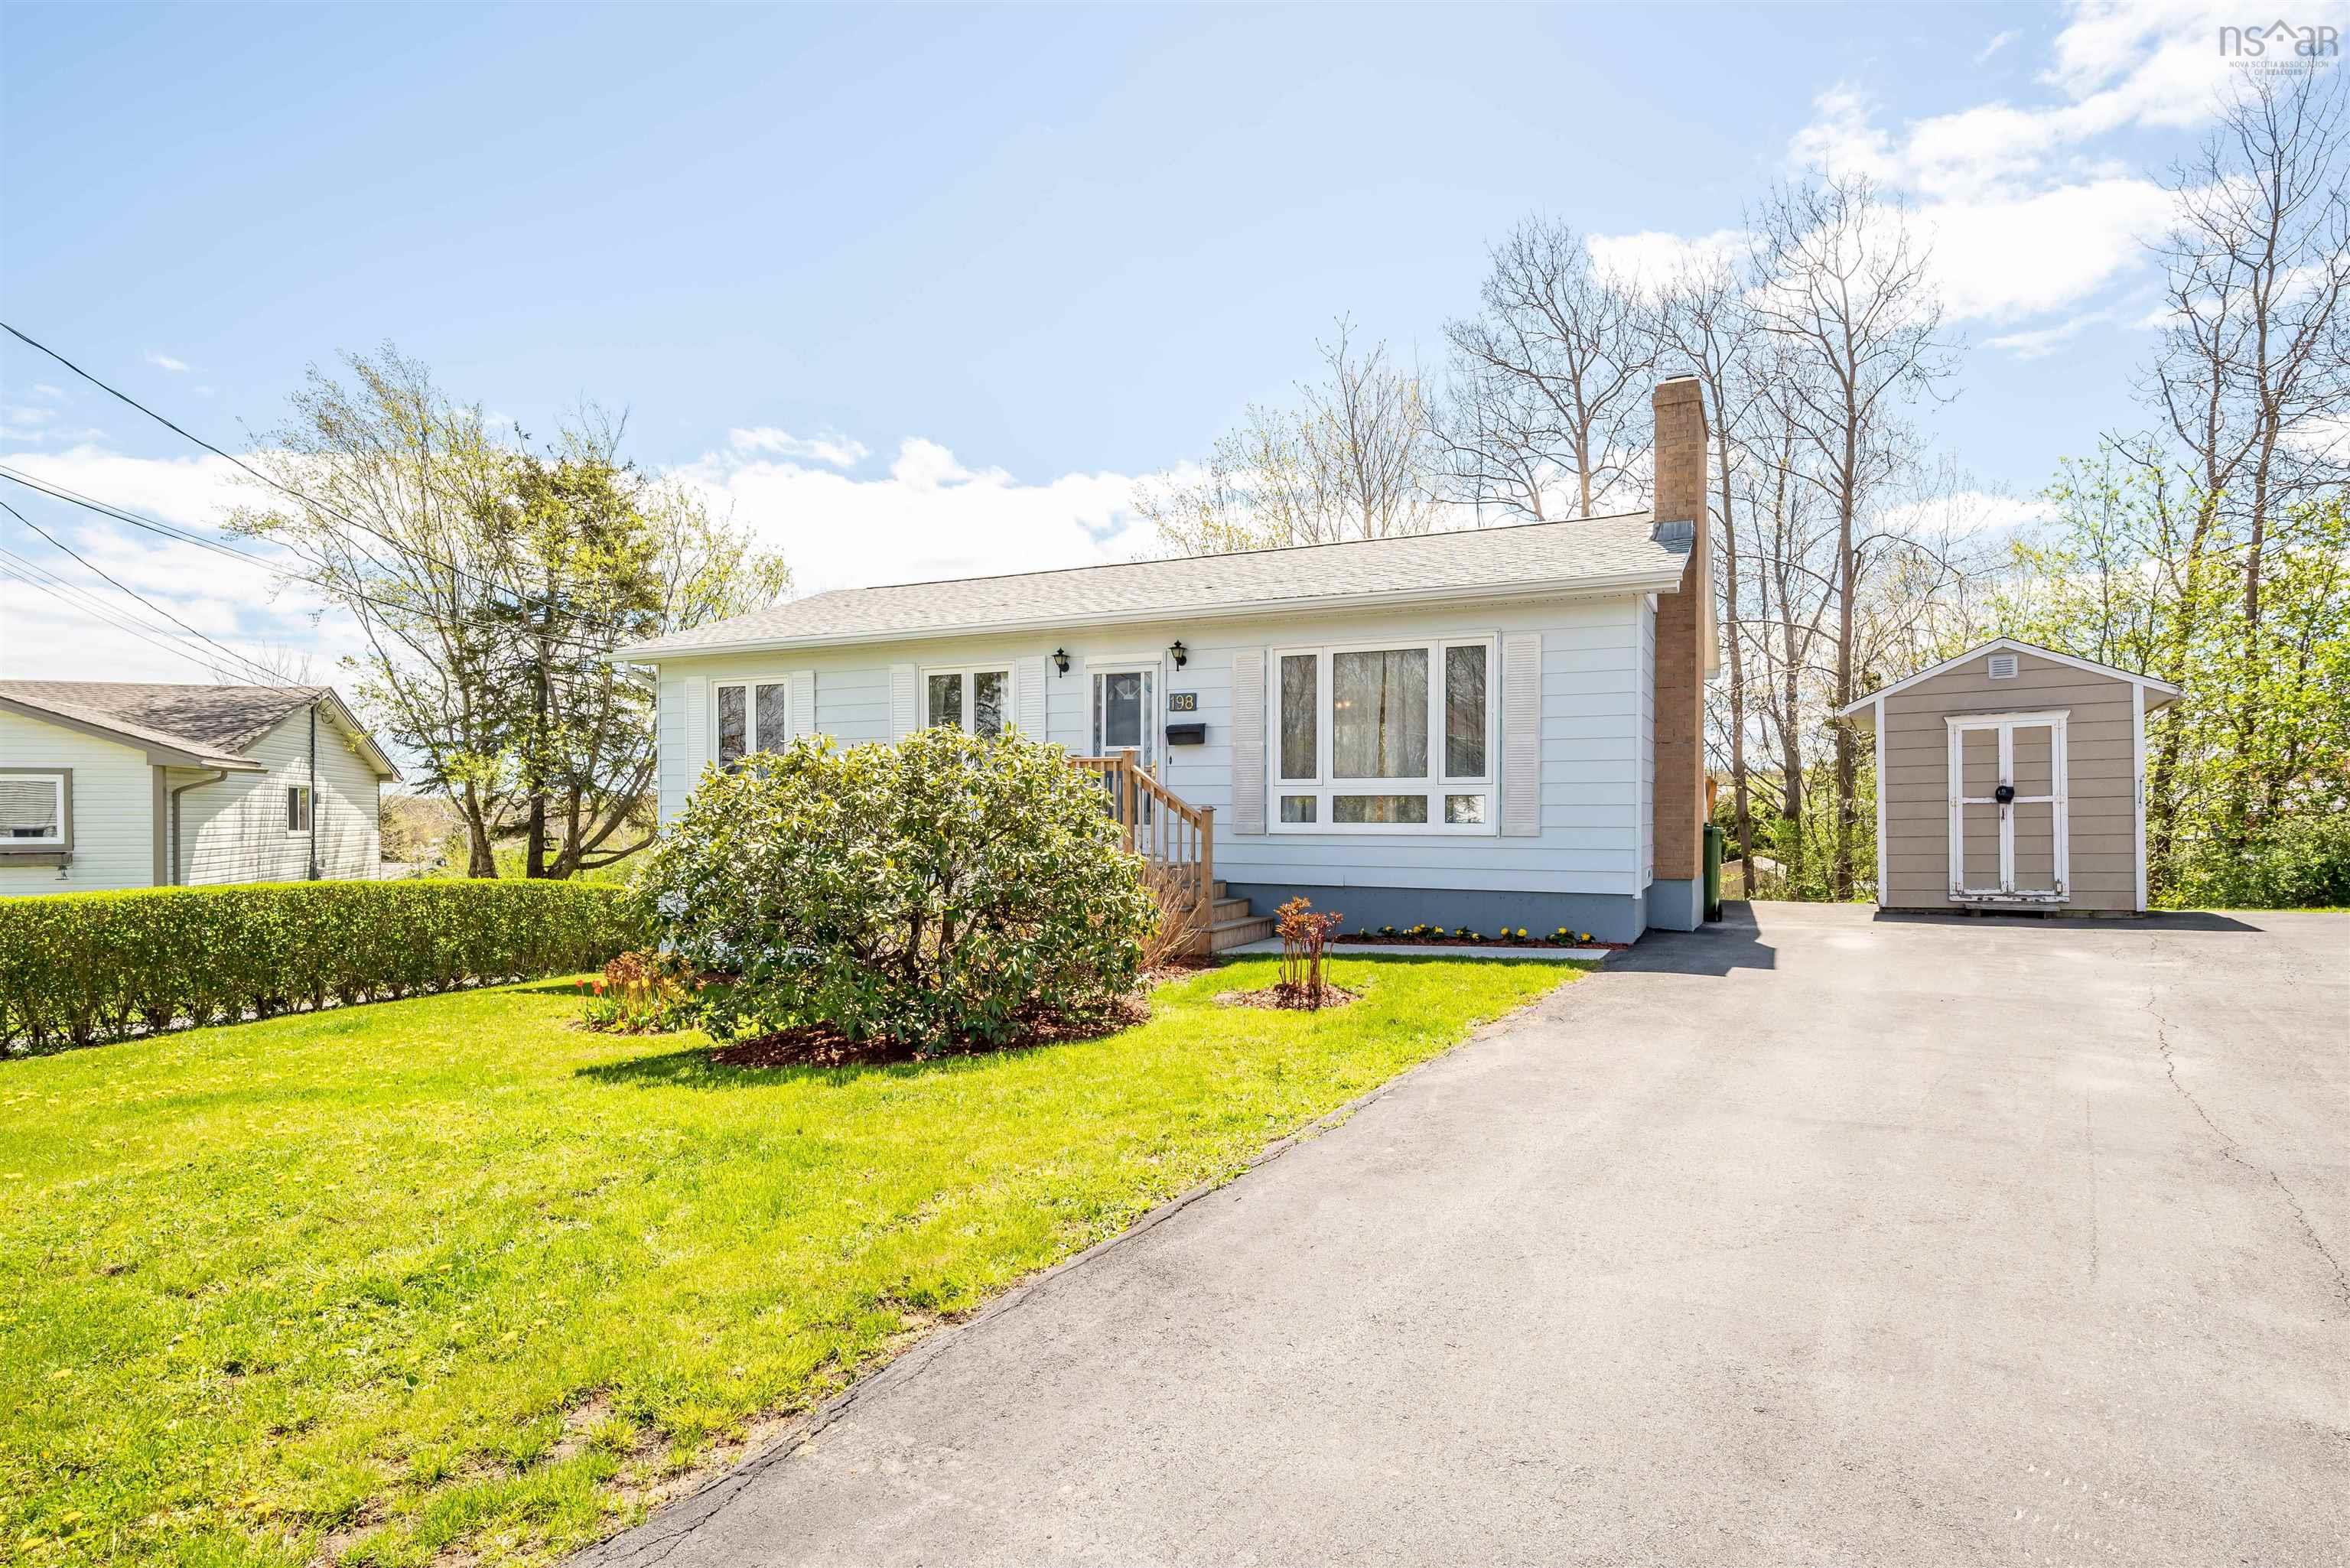 First time on the market in decades this lovingly maintained 3+ bedroom 2 bath bungalow was home to one family for over 40 years. Now it is time to make it yours. Located on a crescent in Cole Harbour